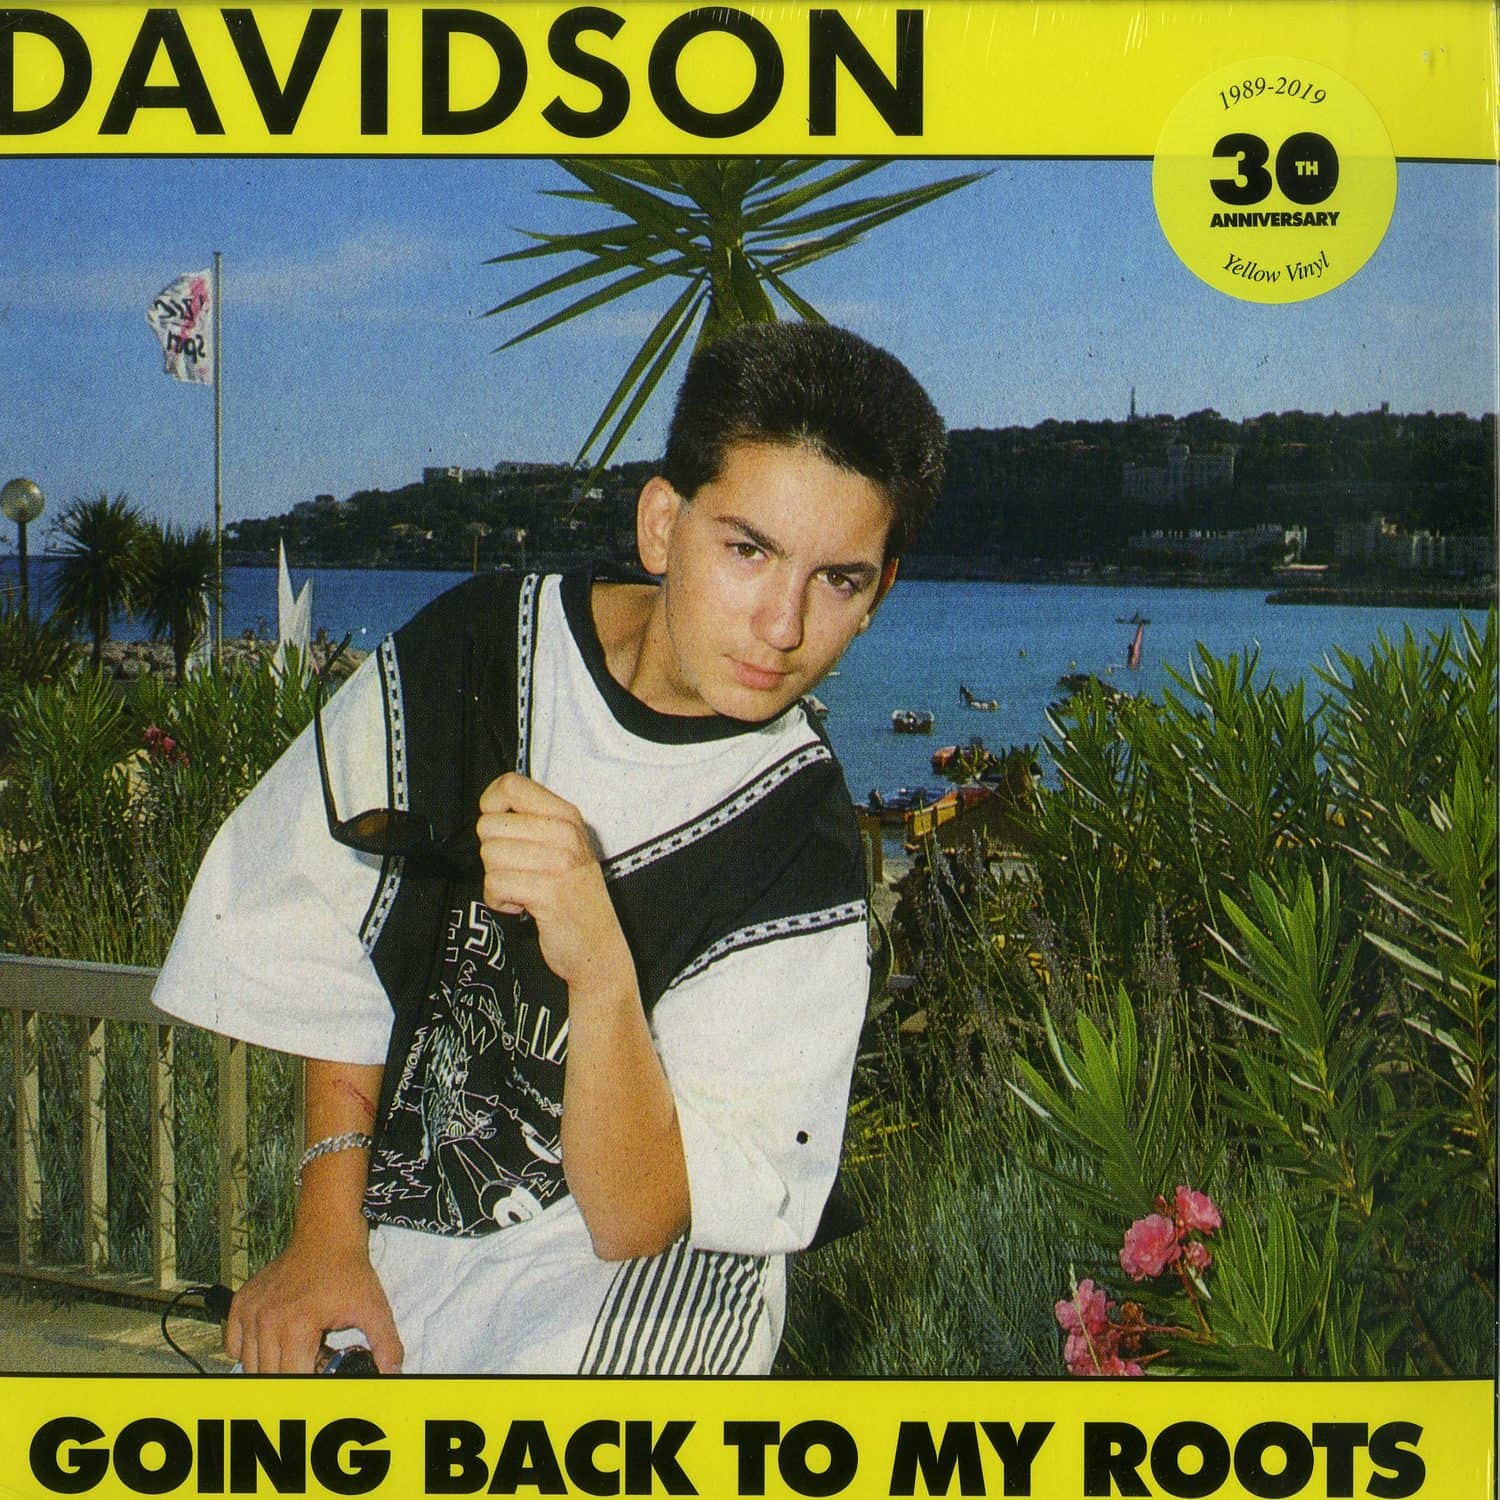 Davidson - GOING BACK TO MY ROOTS